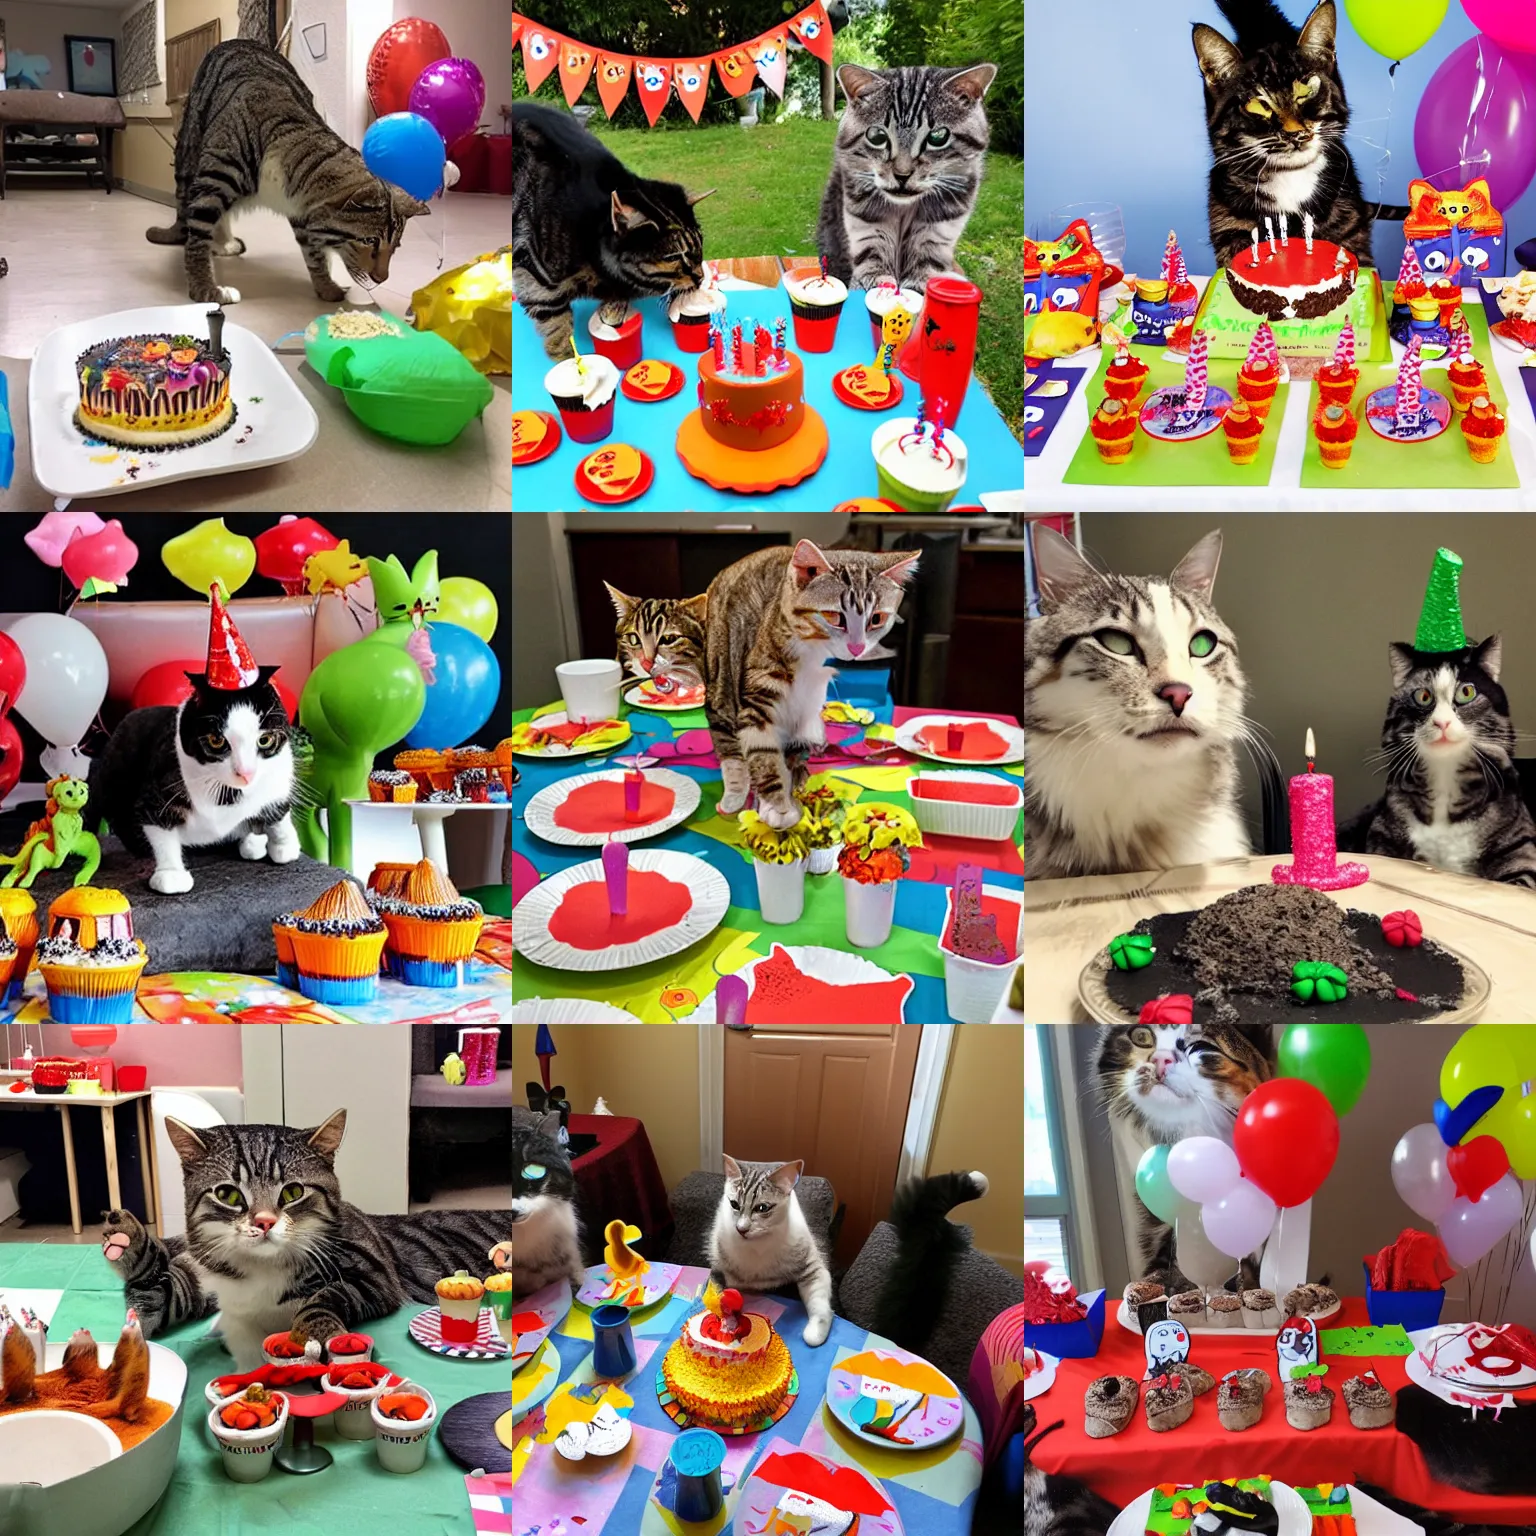 Prompt: Tyrannosaurus arranged a birthday party for cats